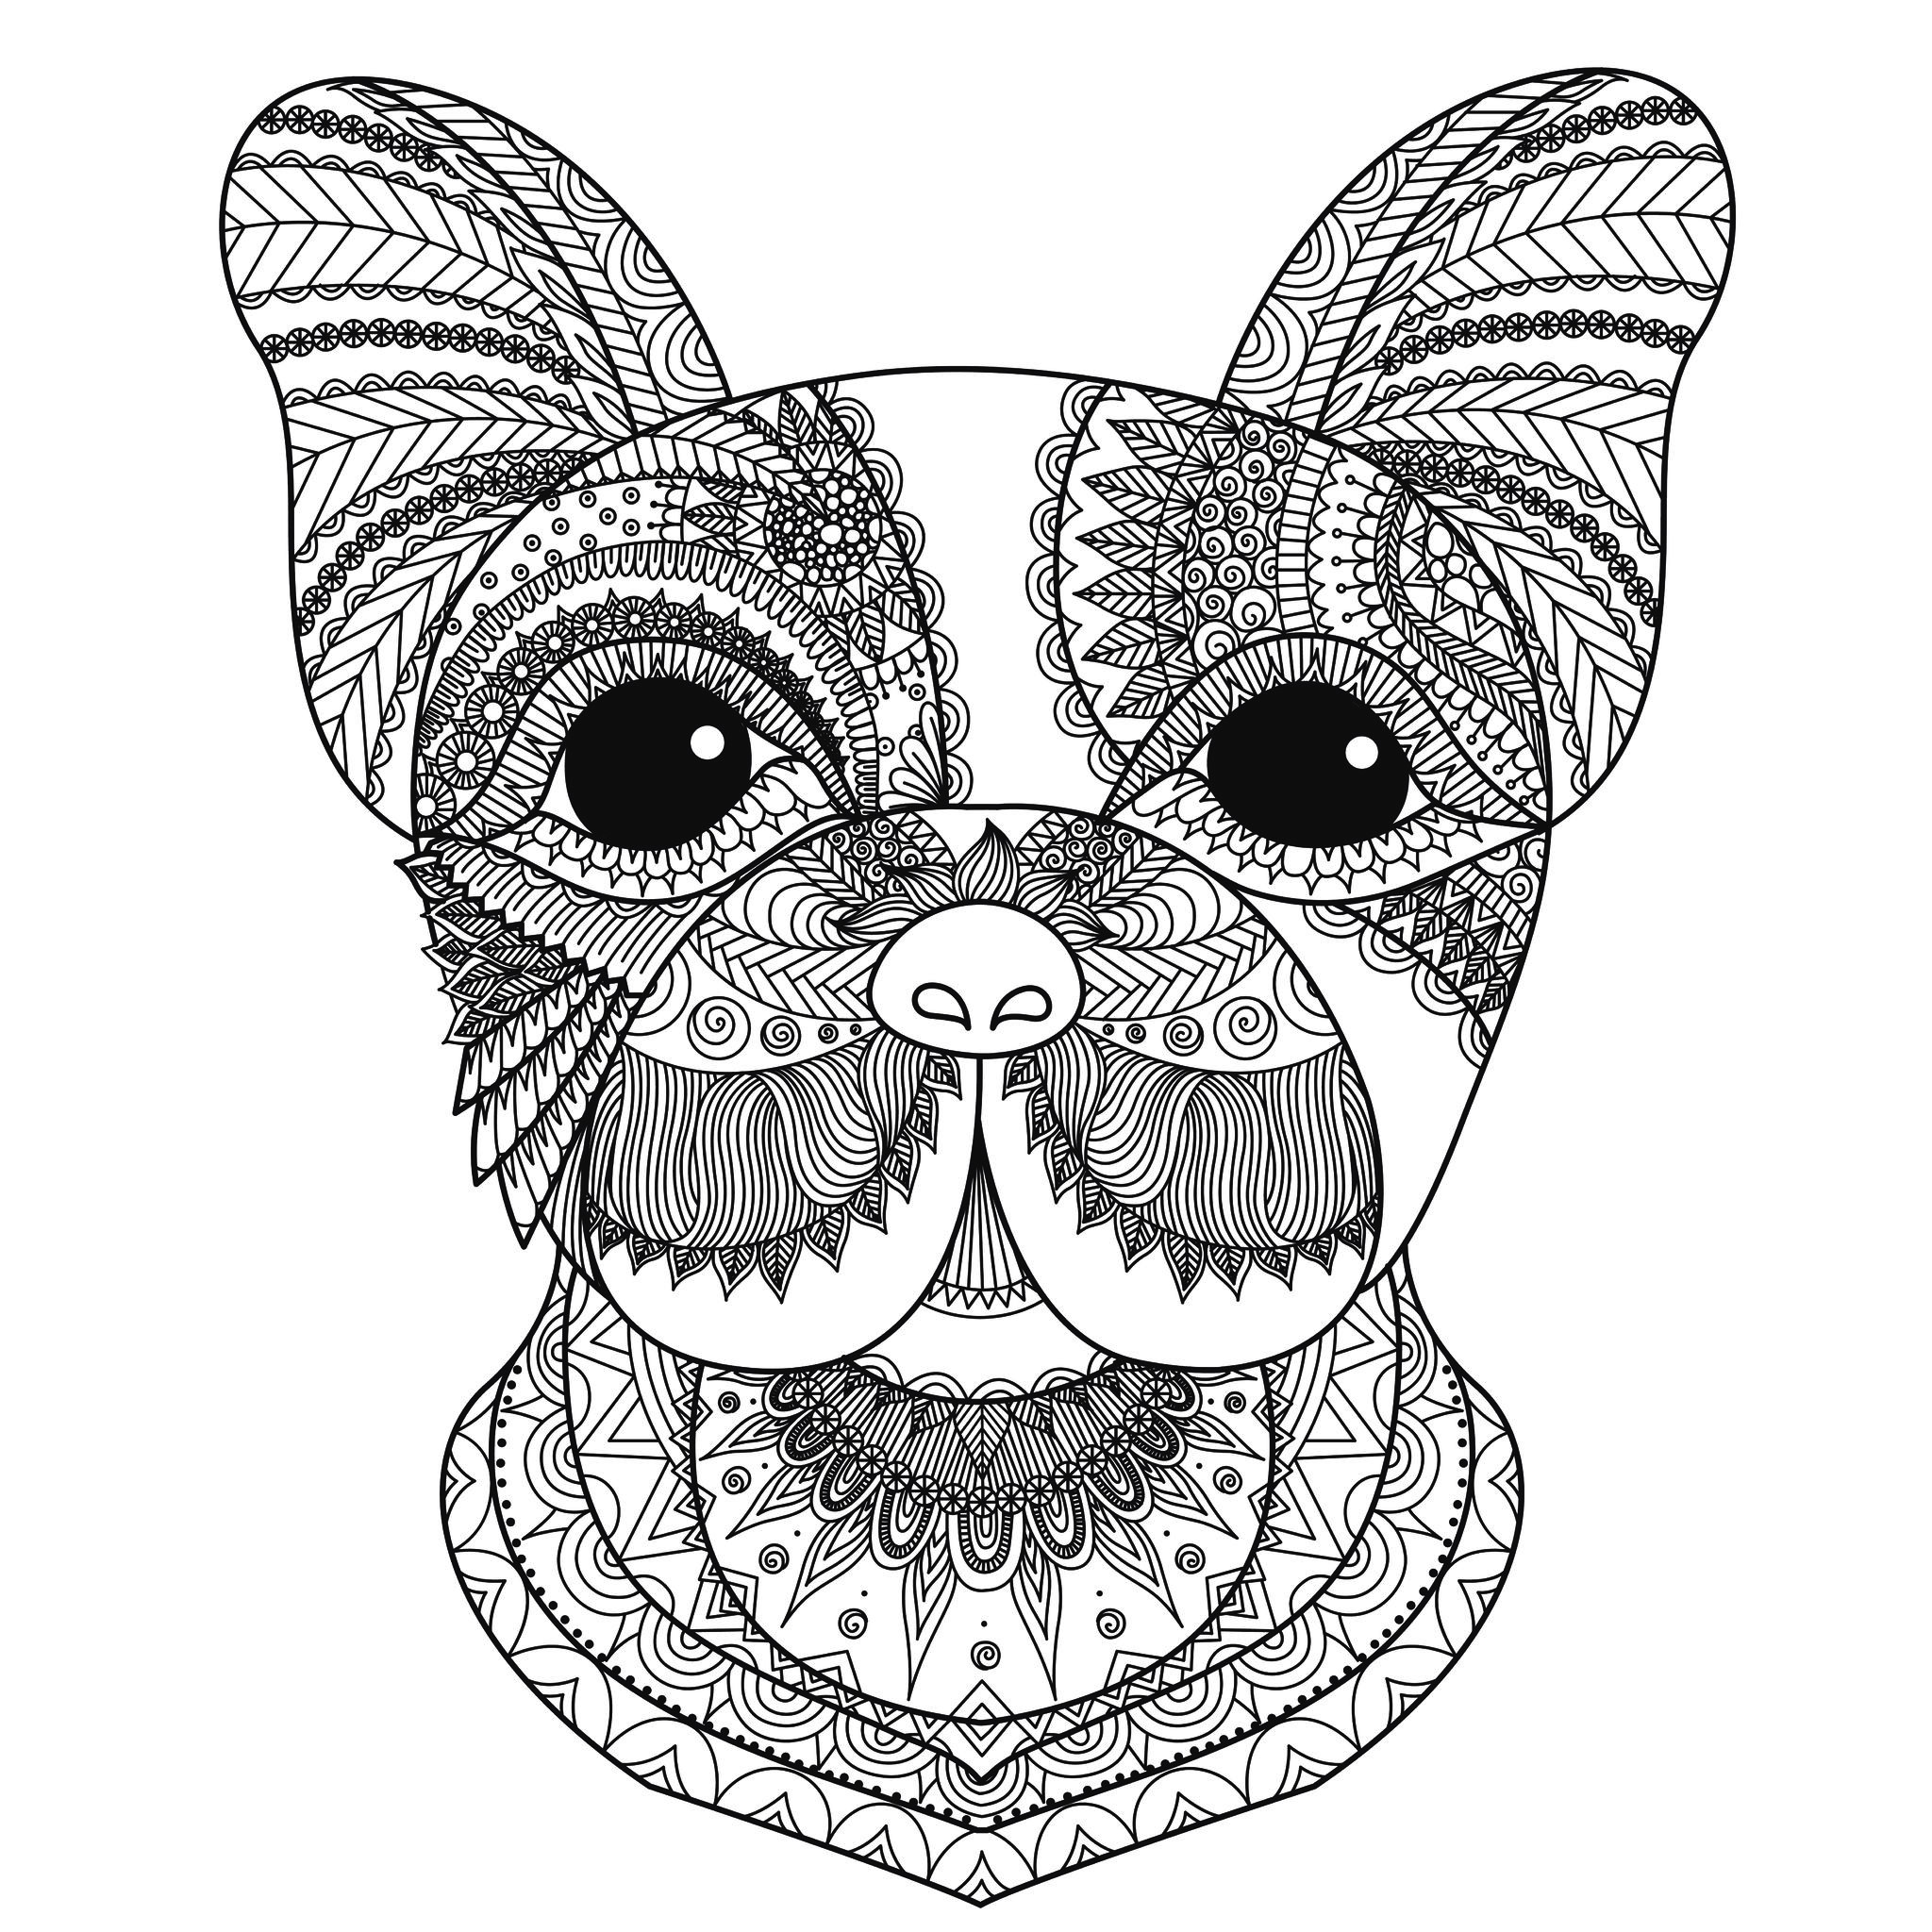 Dog head bimdeedee - Dogs Adult Coloring Pages